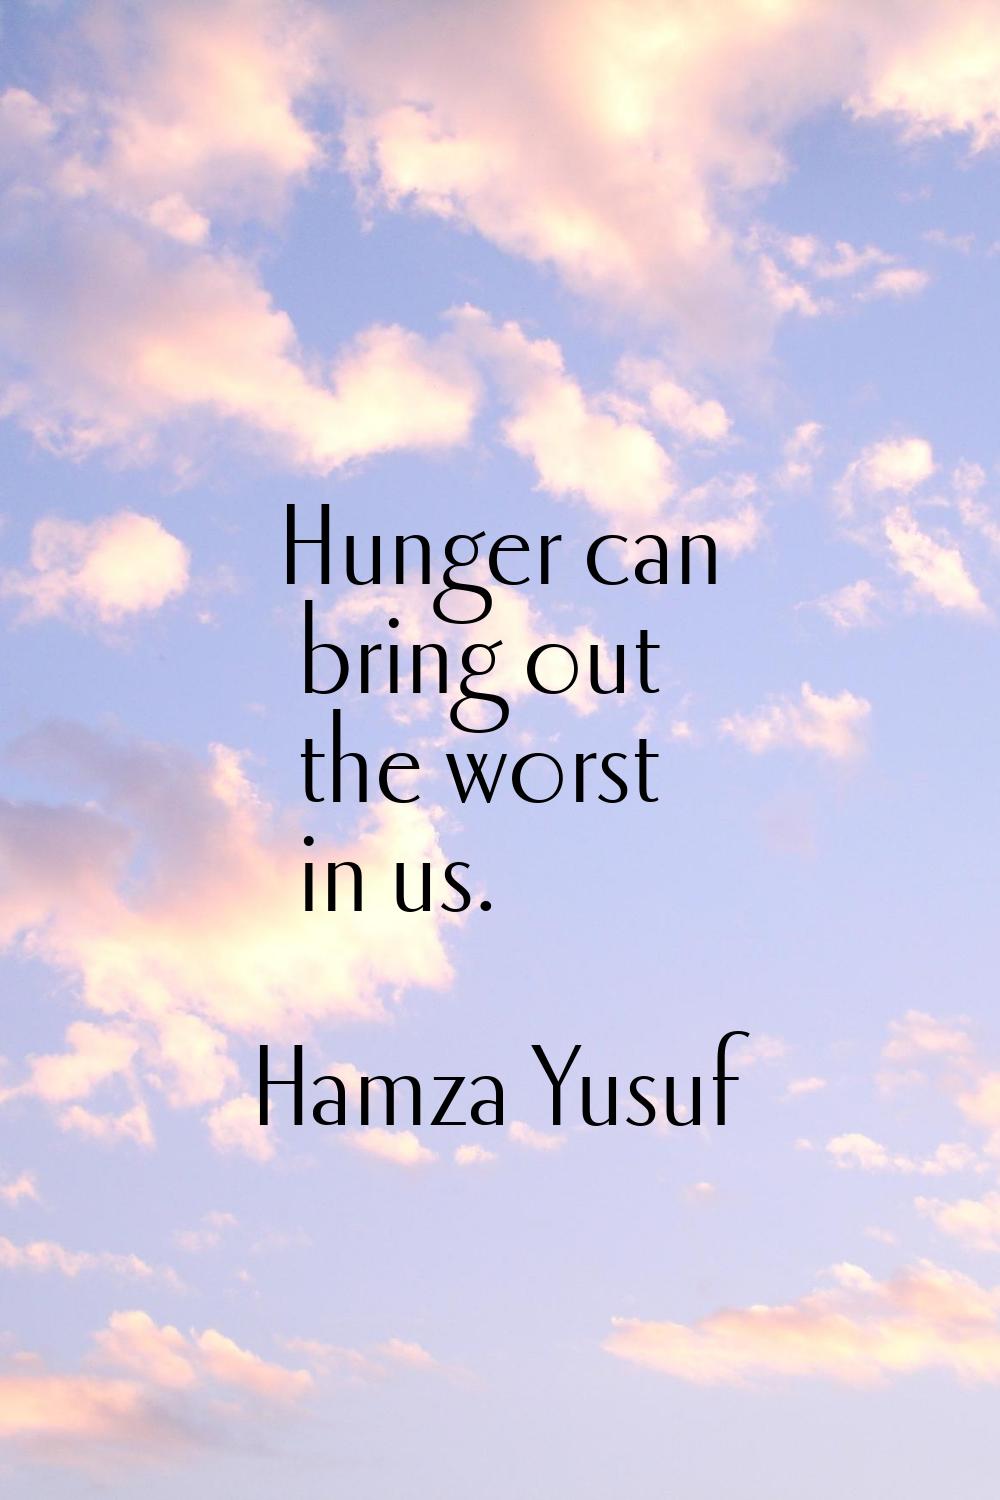 Hunger can bring out the worst in us.